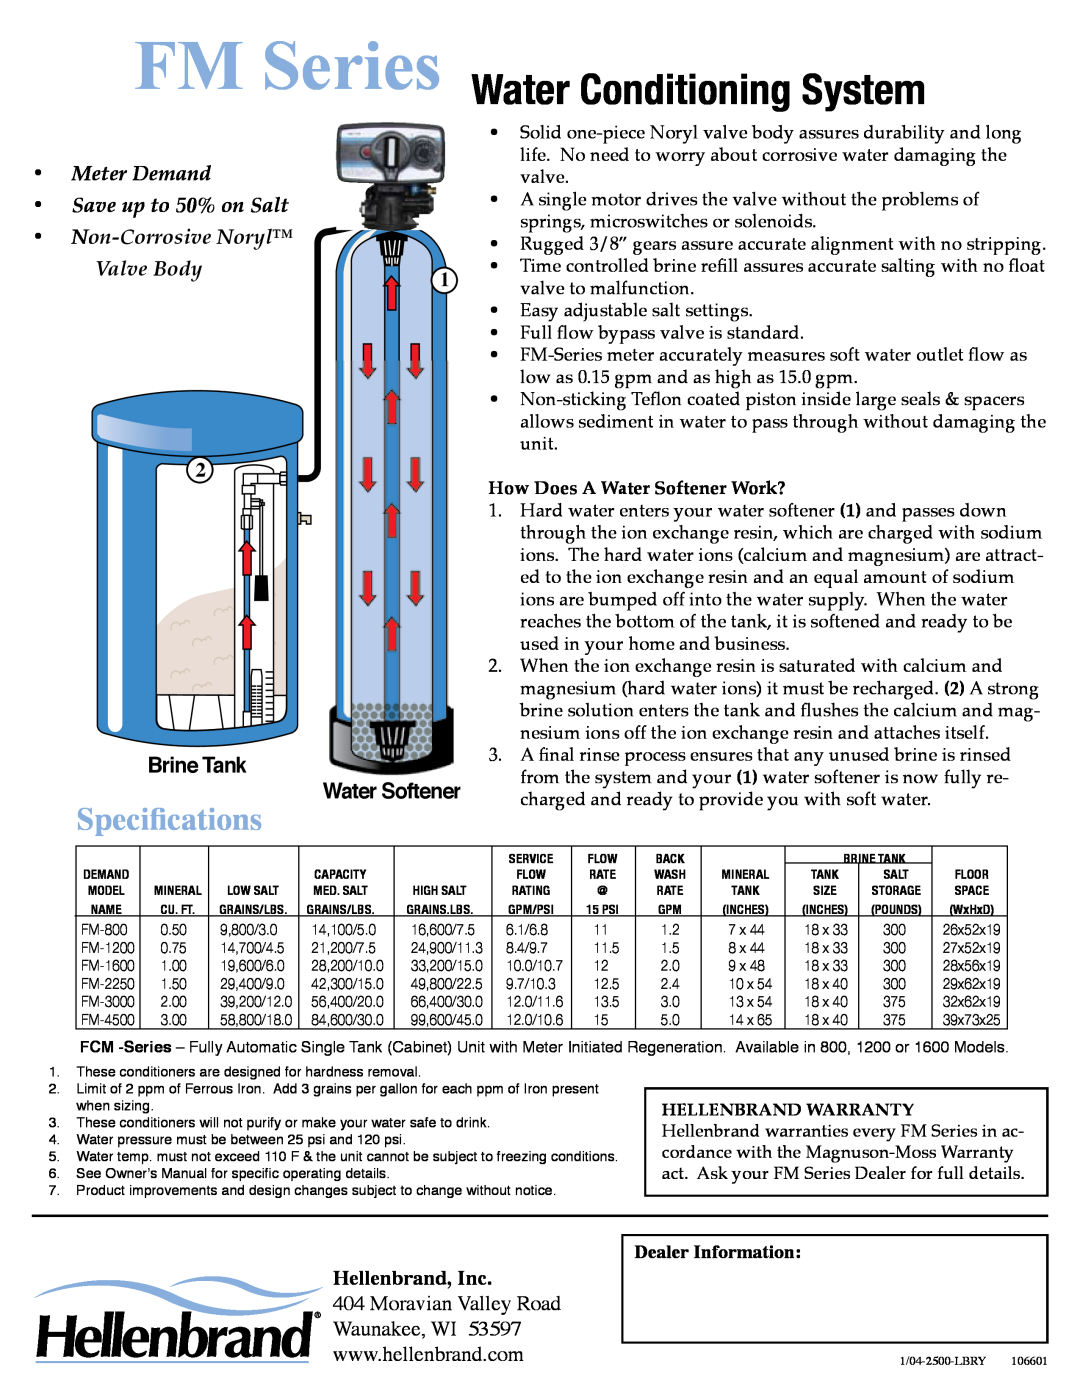 Hellenbrand FM Series manual Water Conditioning System, Specifications, Brine Tank, Water Softener, Non-Corrosive Noryl 